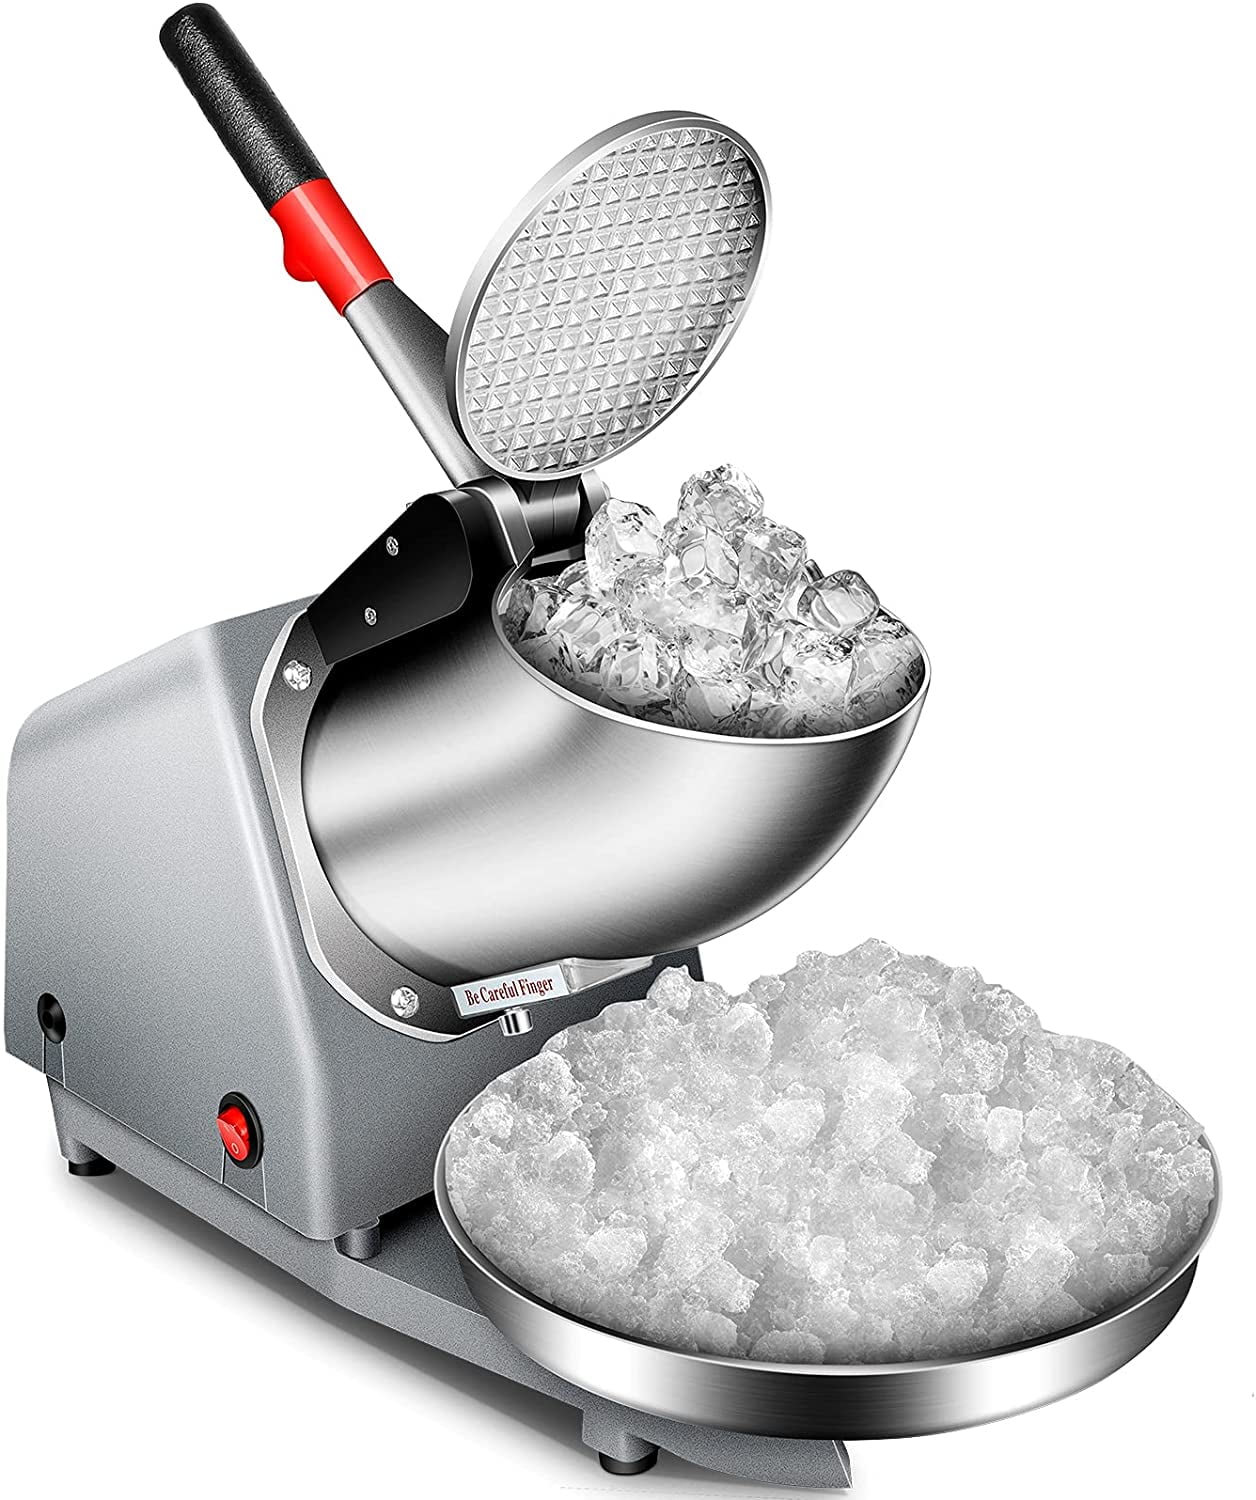 Goplus Electric Ice Crusher Shaver Machine Snow Cone Maker Shaved Ice 143 lbs